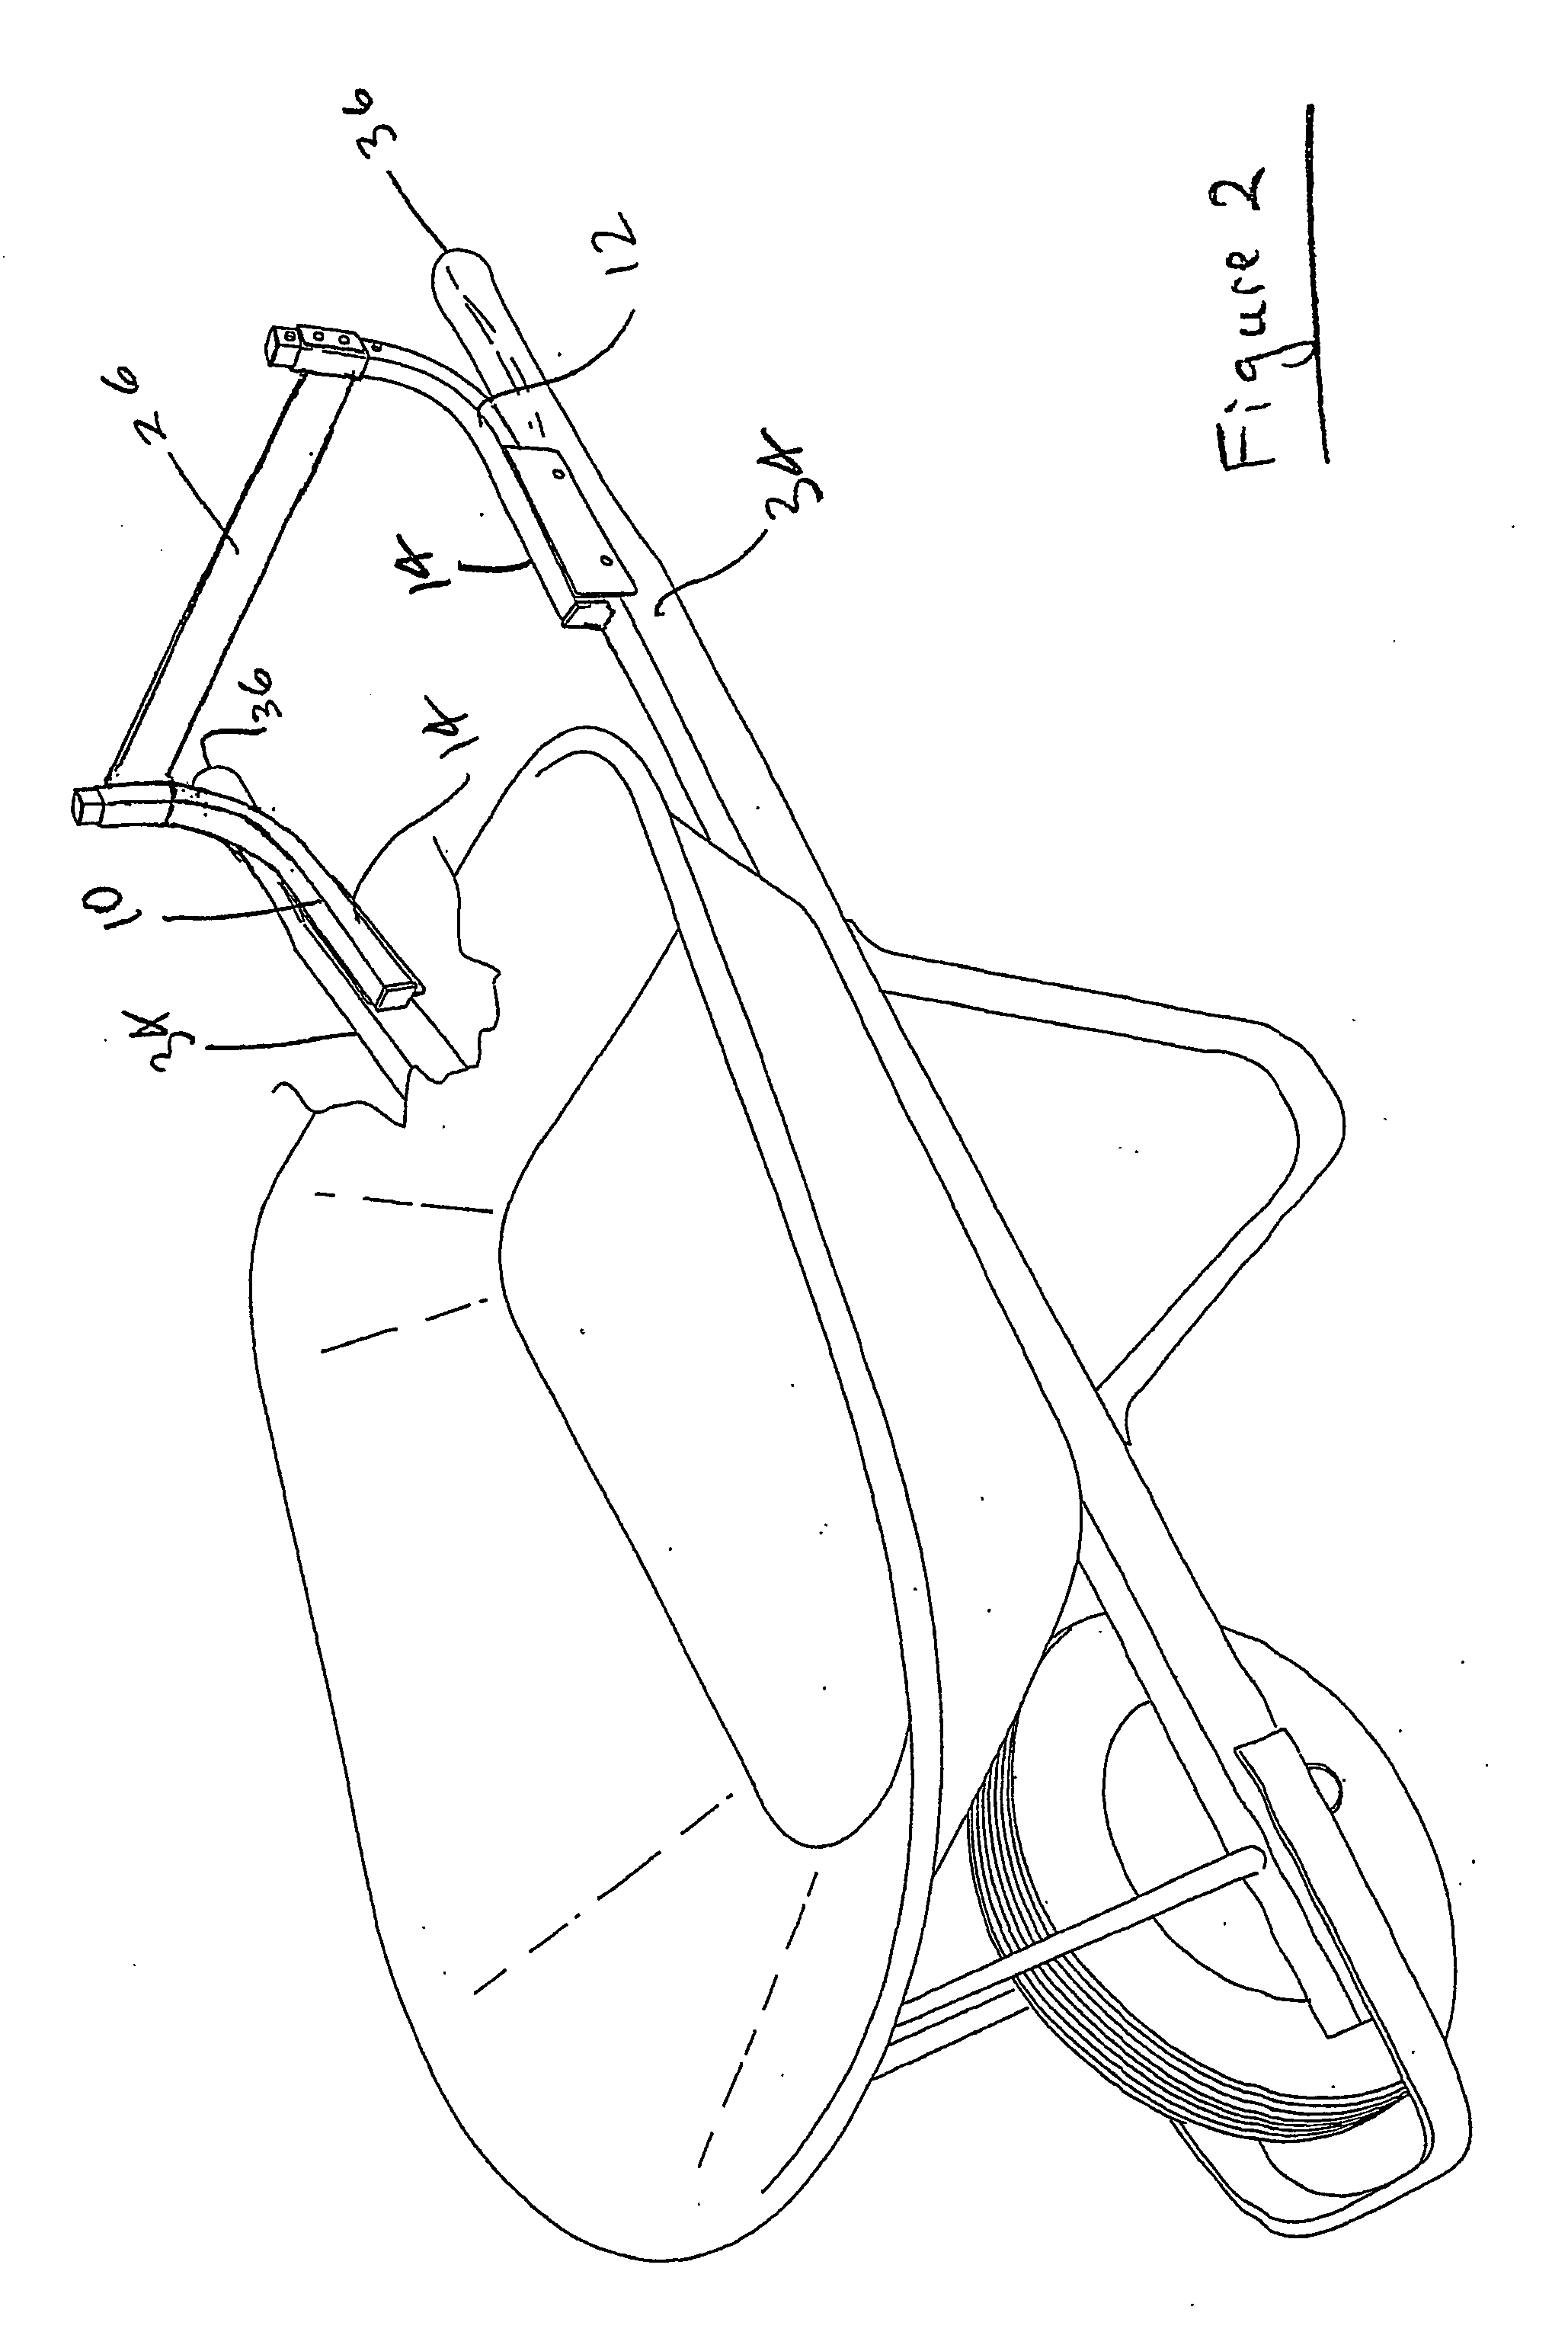 Device to assist propulson of hand-propelled vehicles